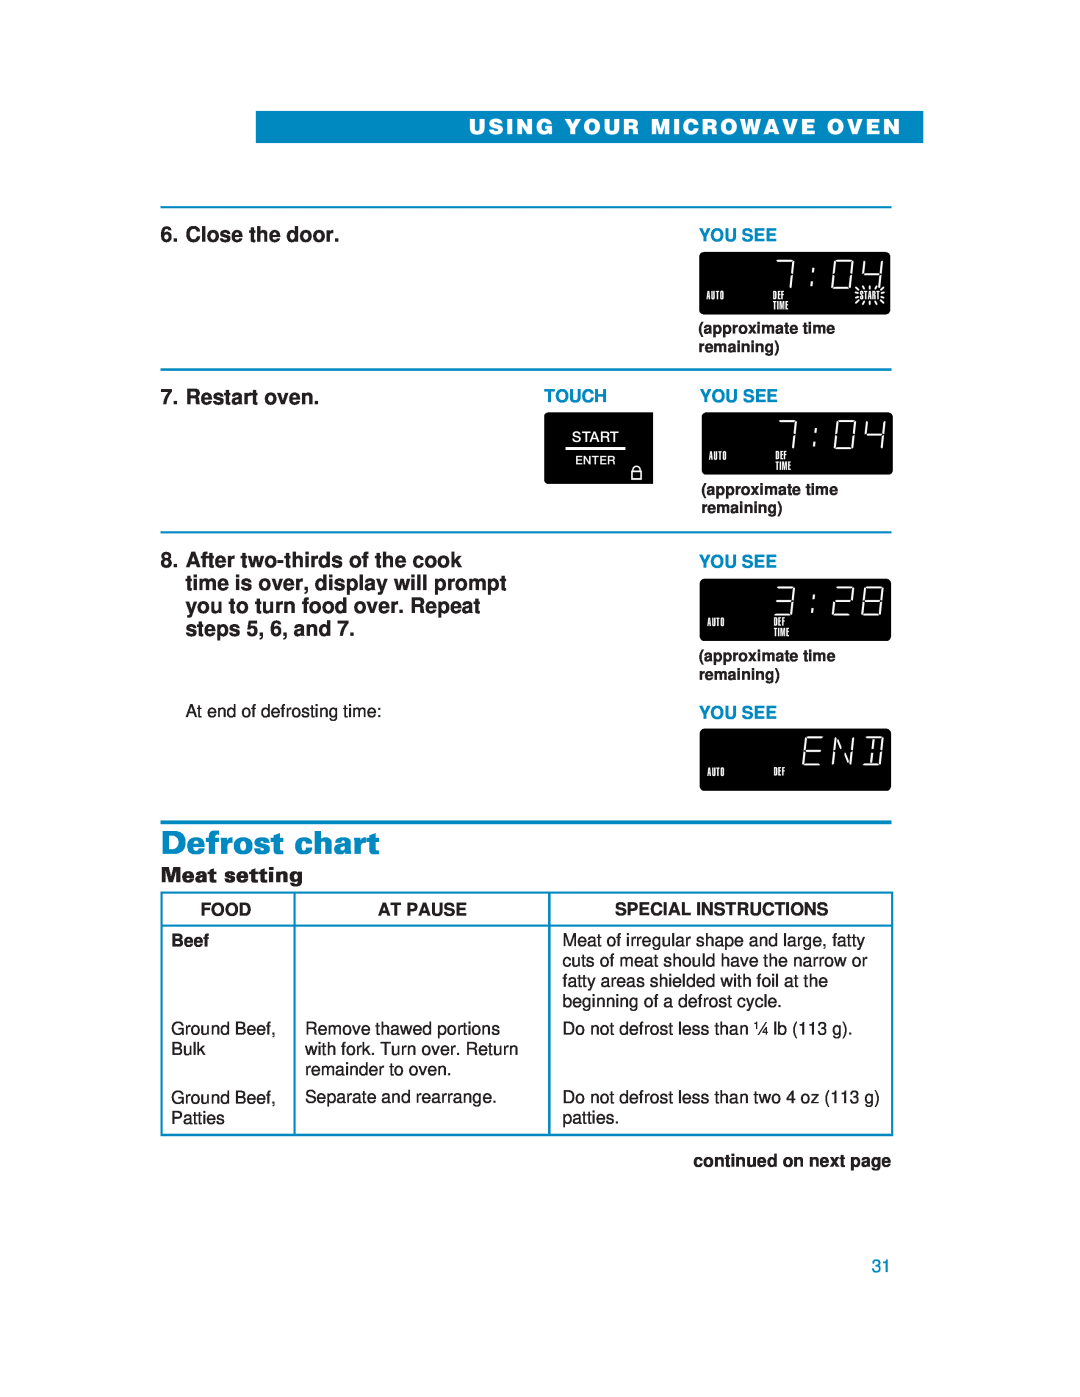 Whirlpool YMH6130XE warranty Defrost chart, Close the door, Restart oven, Meat setting, Using Your Microwave Oven 